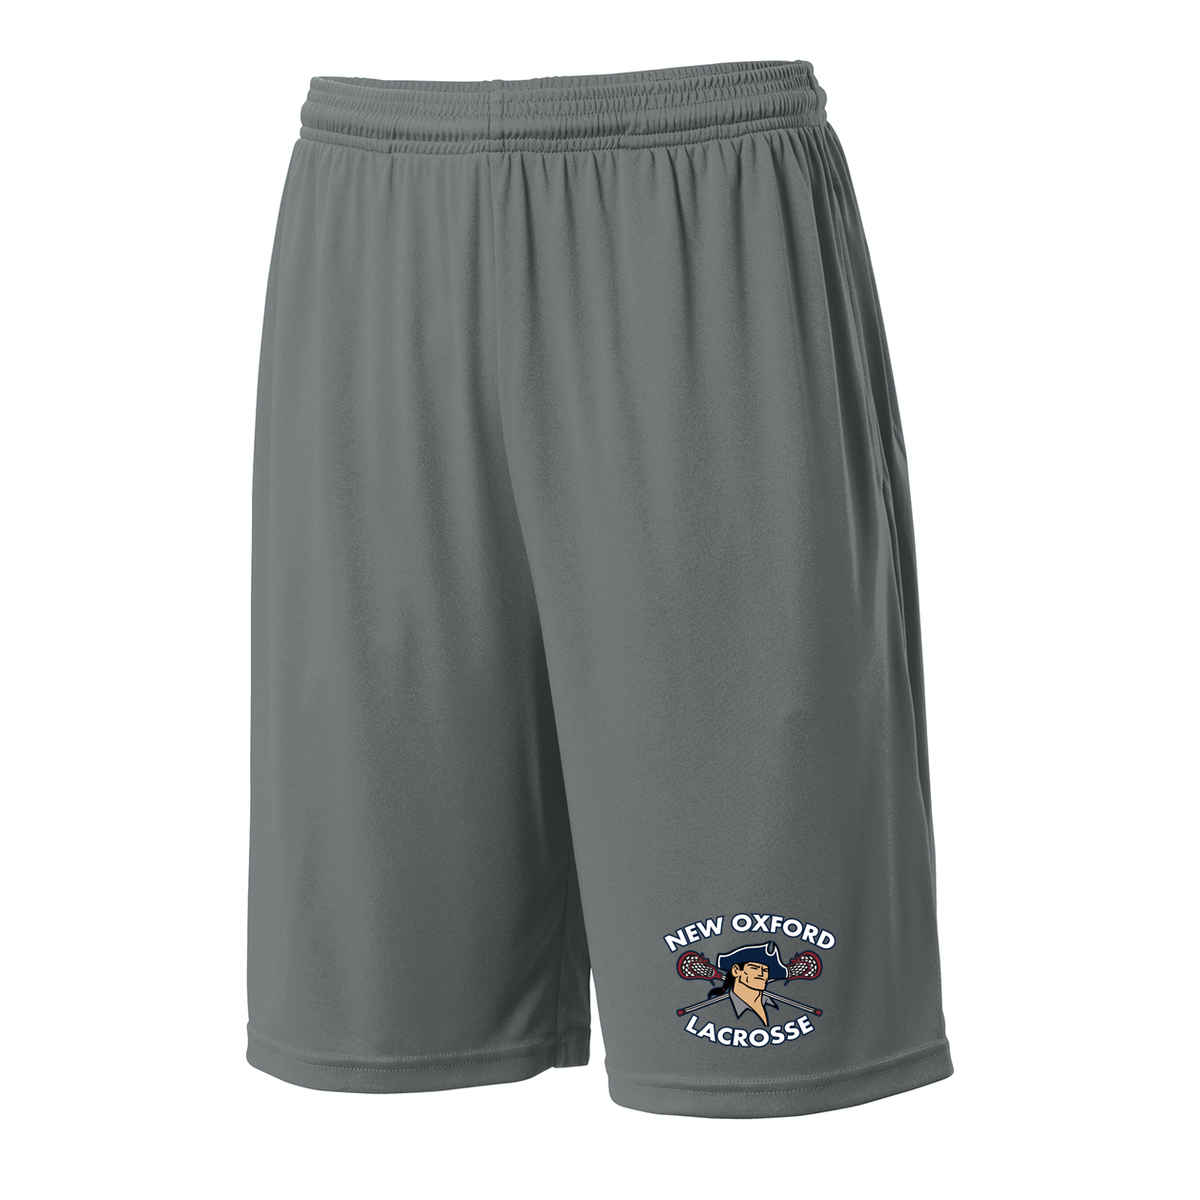 New Oxford HS Lacrosse Shorts